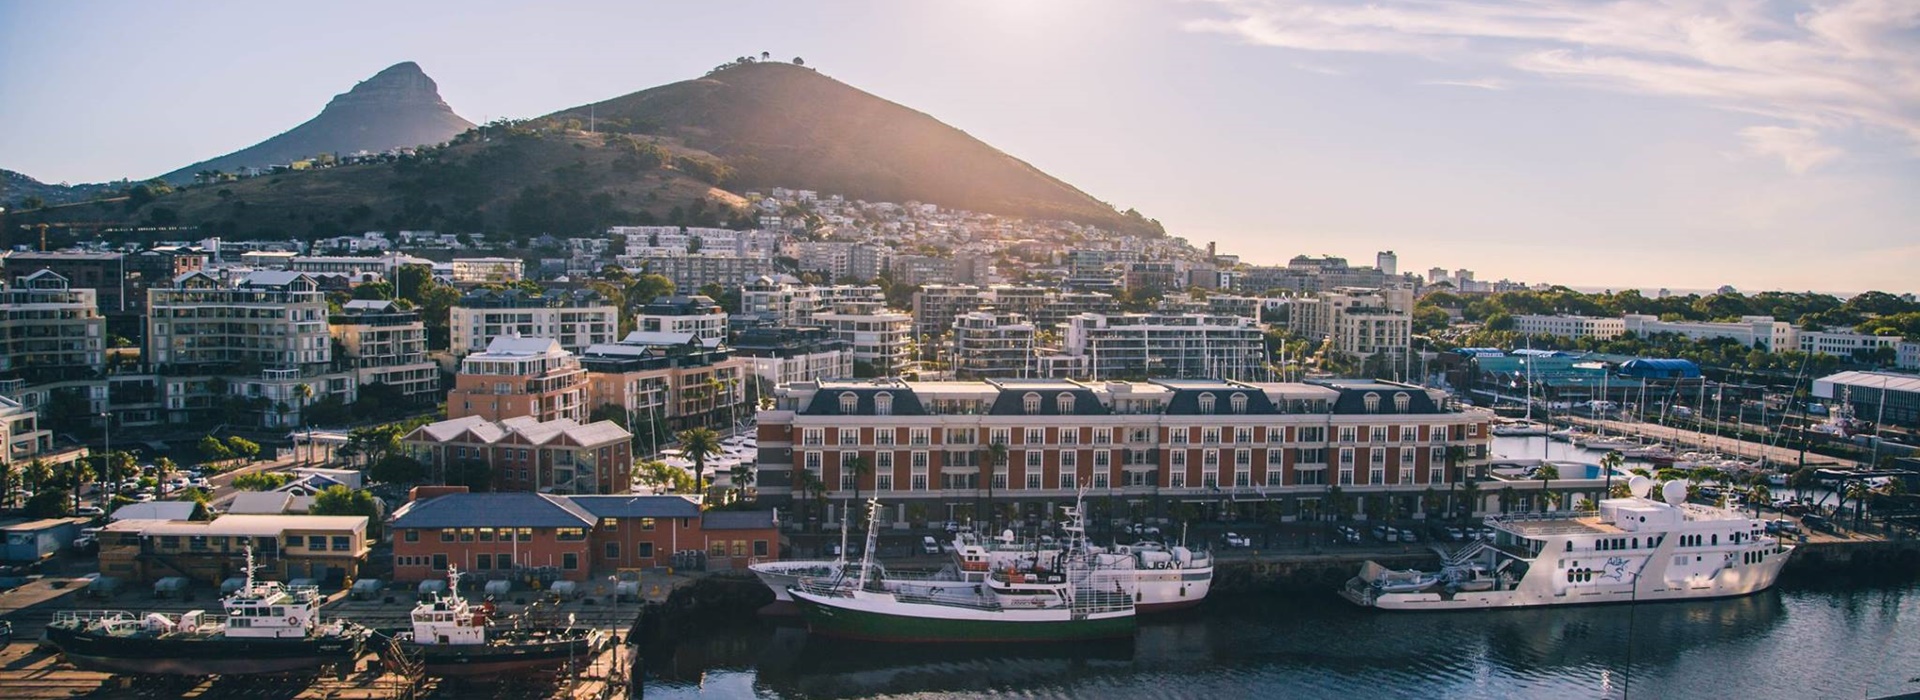 The Silo Hotel Capetown: South Africa's Swankiest Hotel